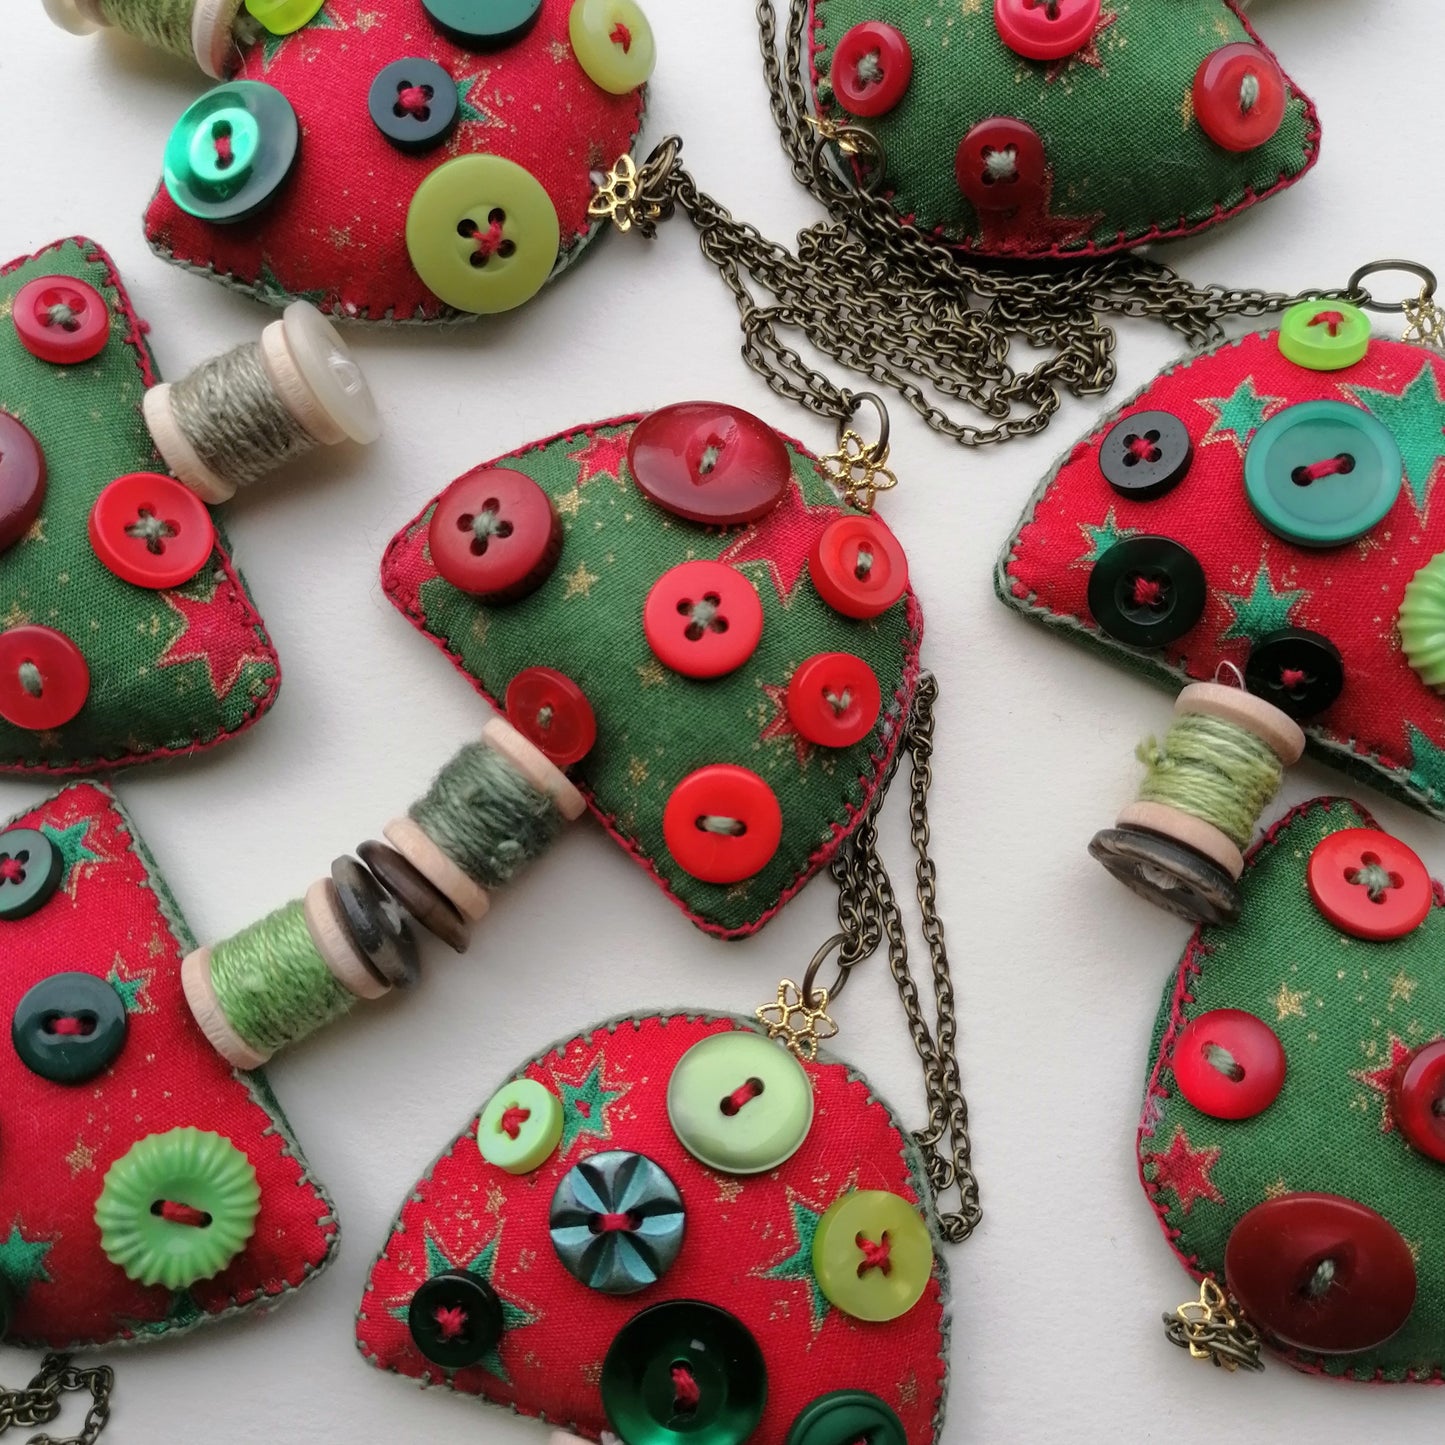 Red and Green fabric toadstool ornaments with buttons and spools.